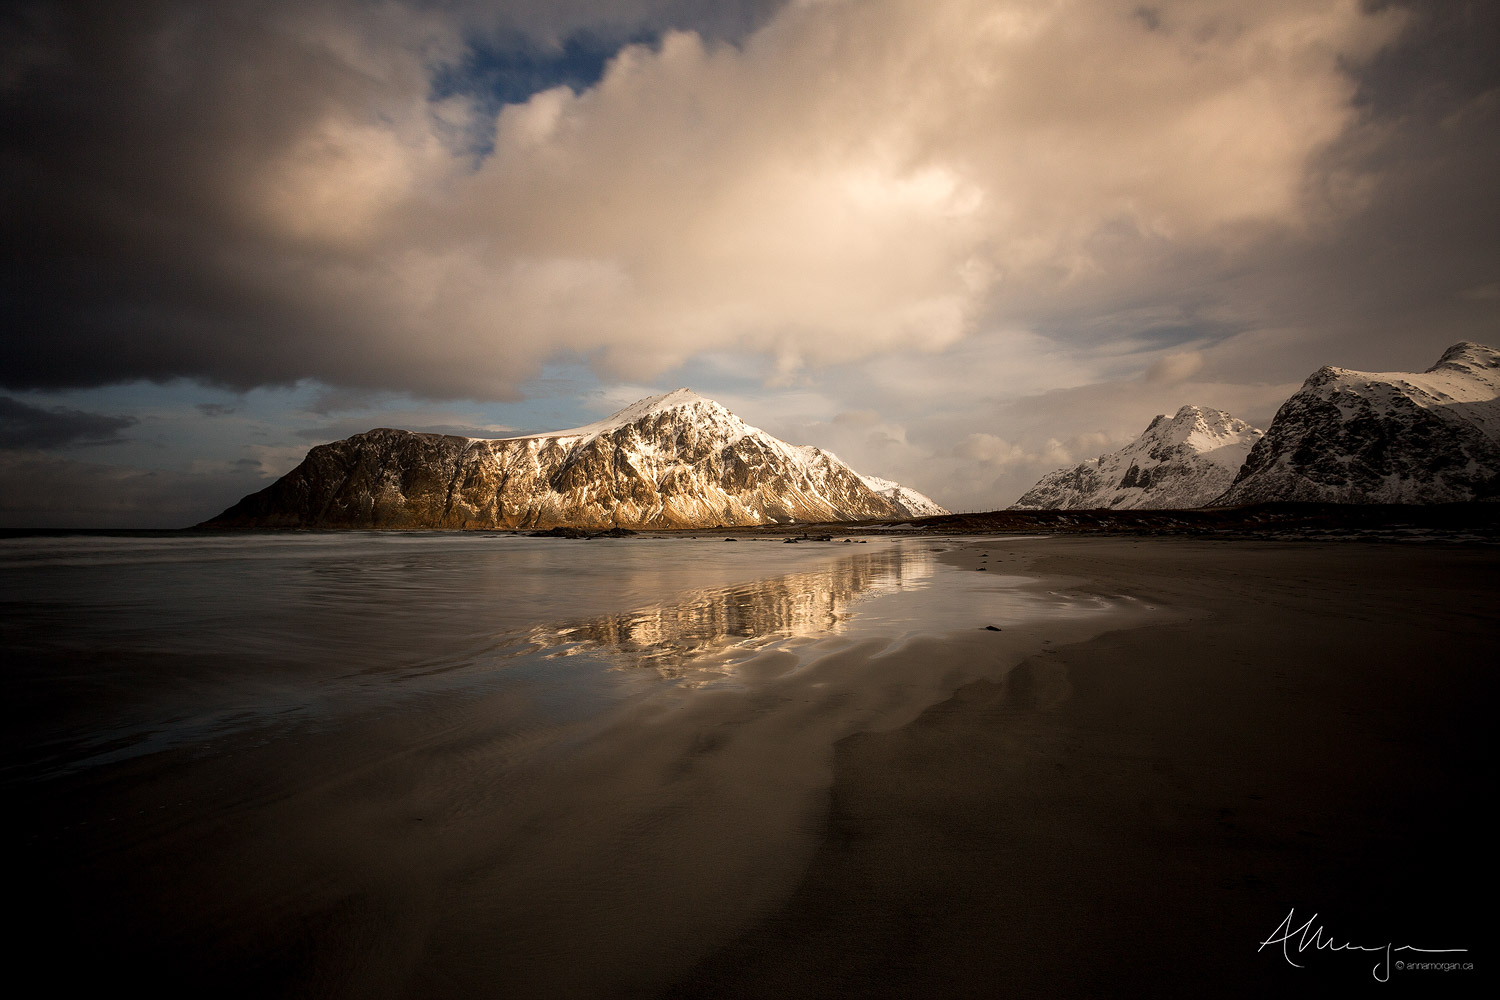 Snow capped mountains reflected in a calm, wet sand beach at sunset after a winter storm.